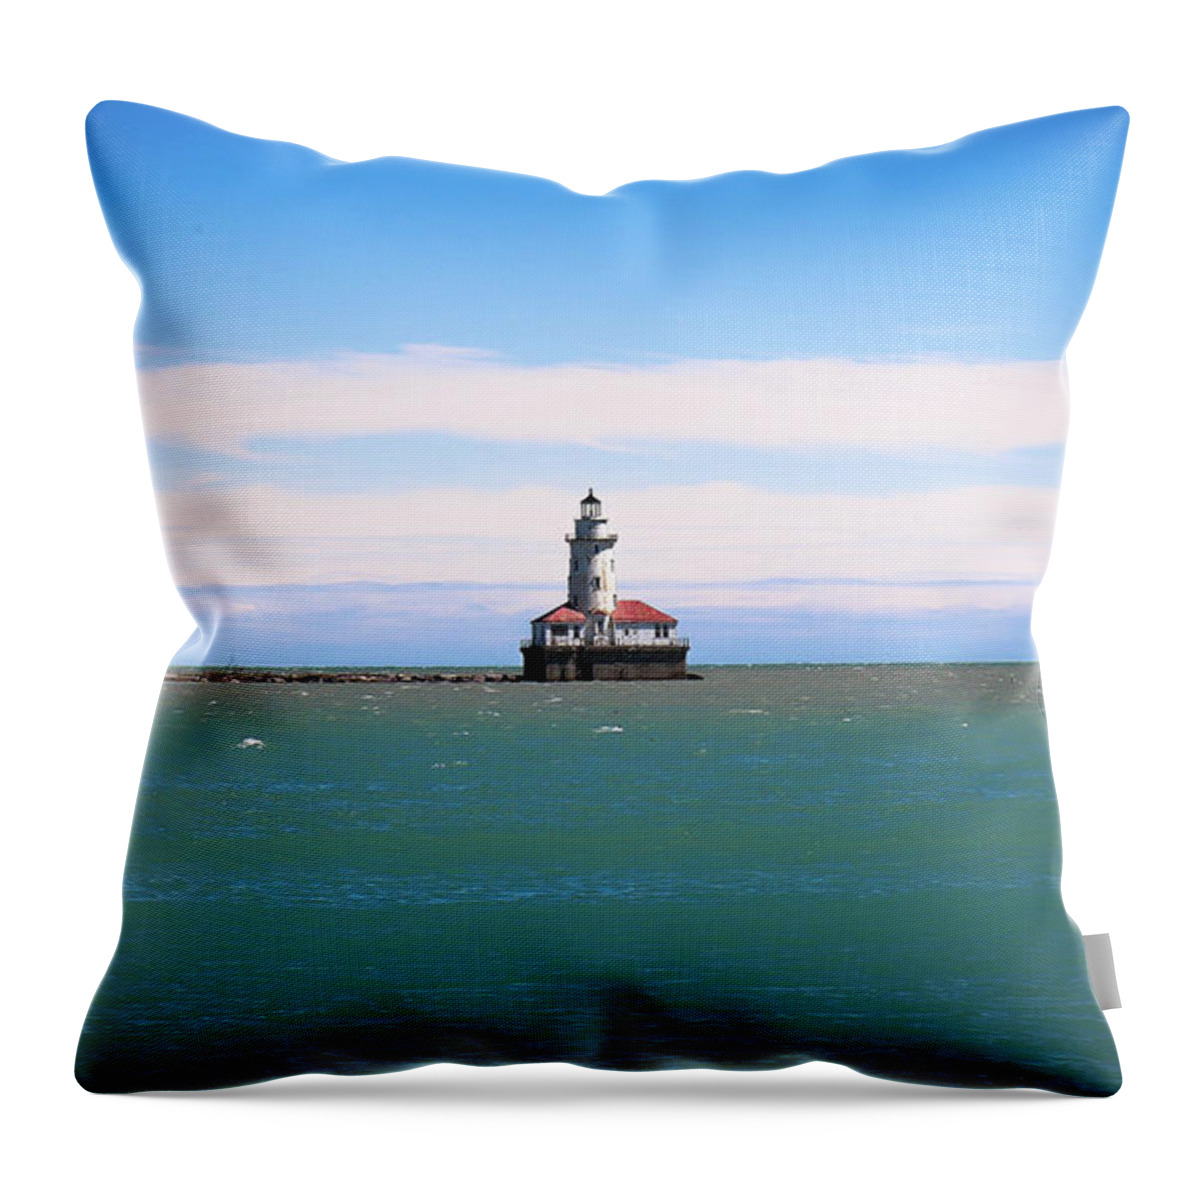 Chicago Throw Pillow featuring the photograph Chicago Harbor Lighthouse by Veronica Batterson